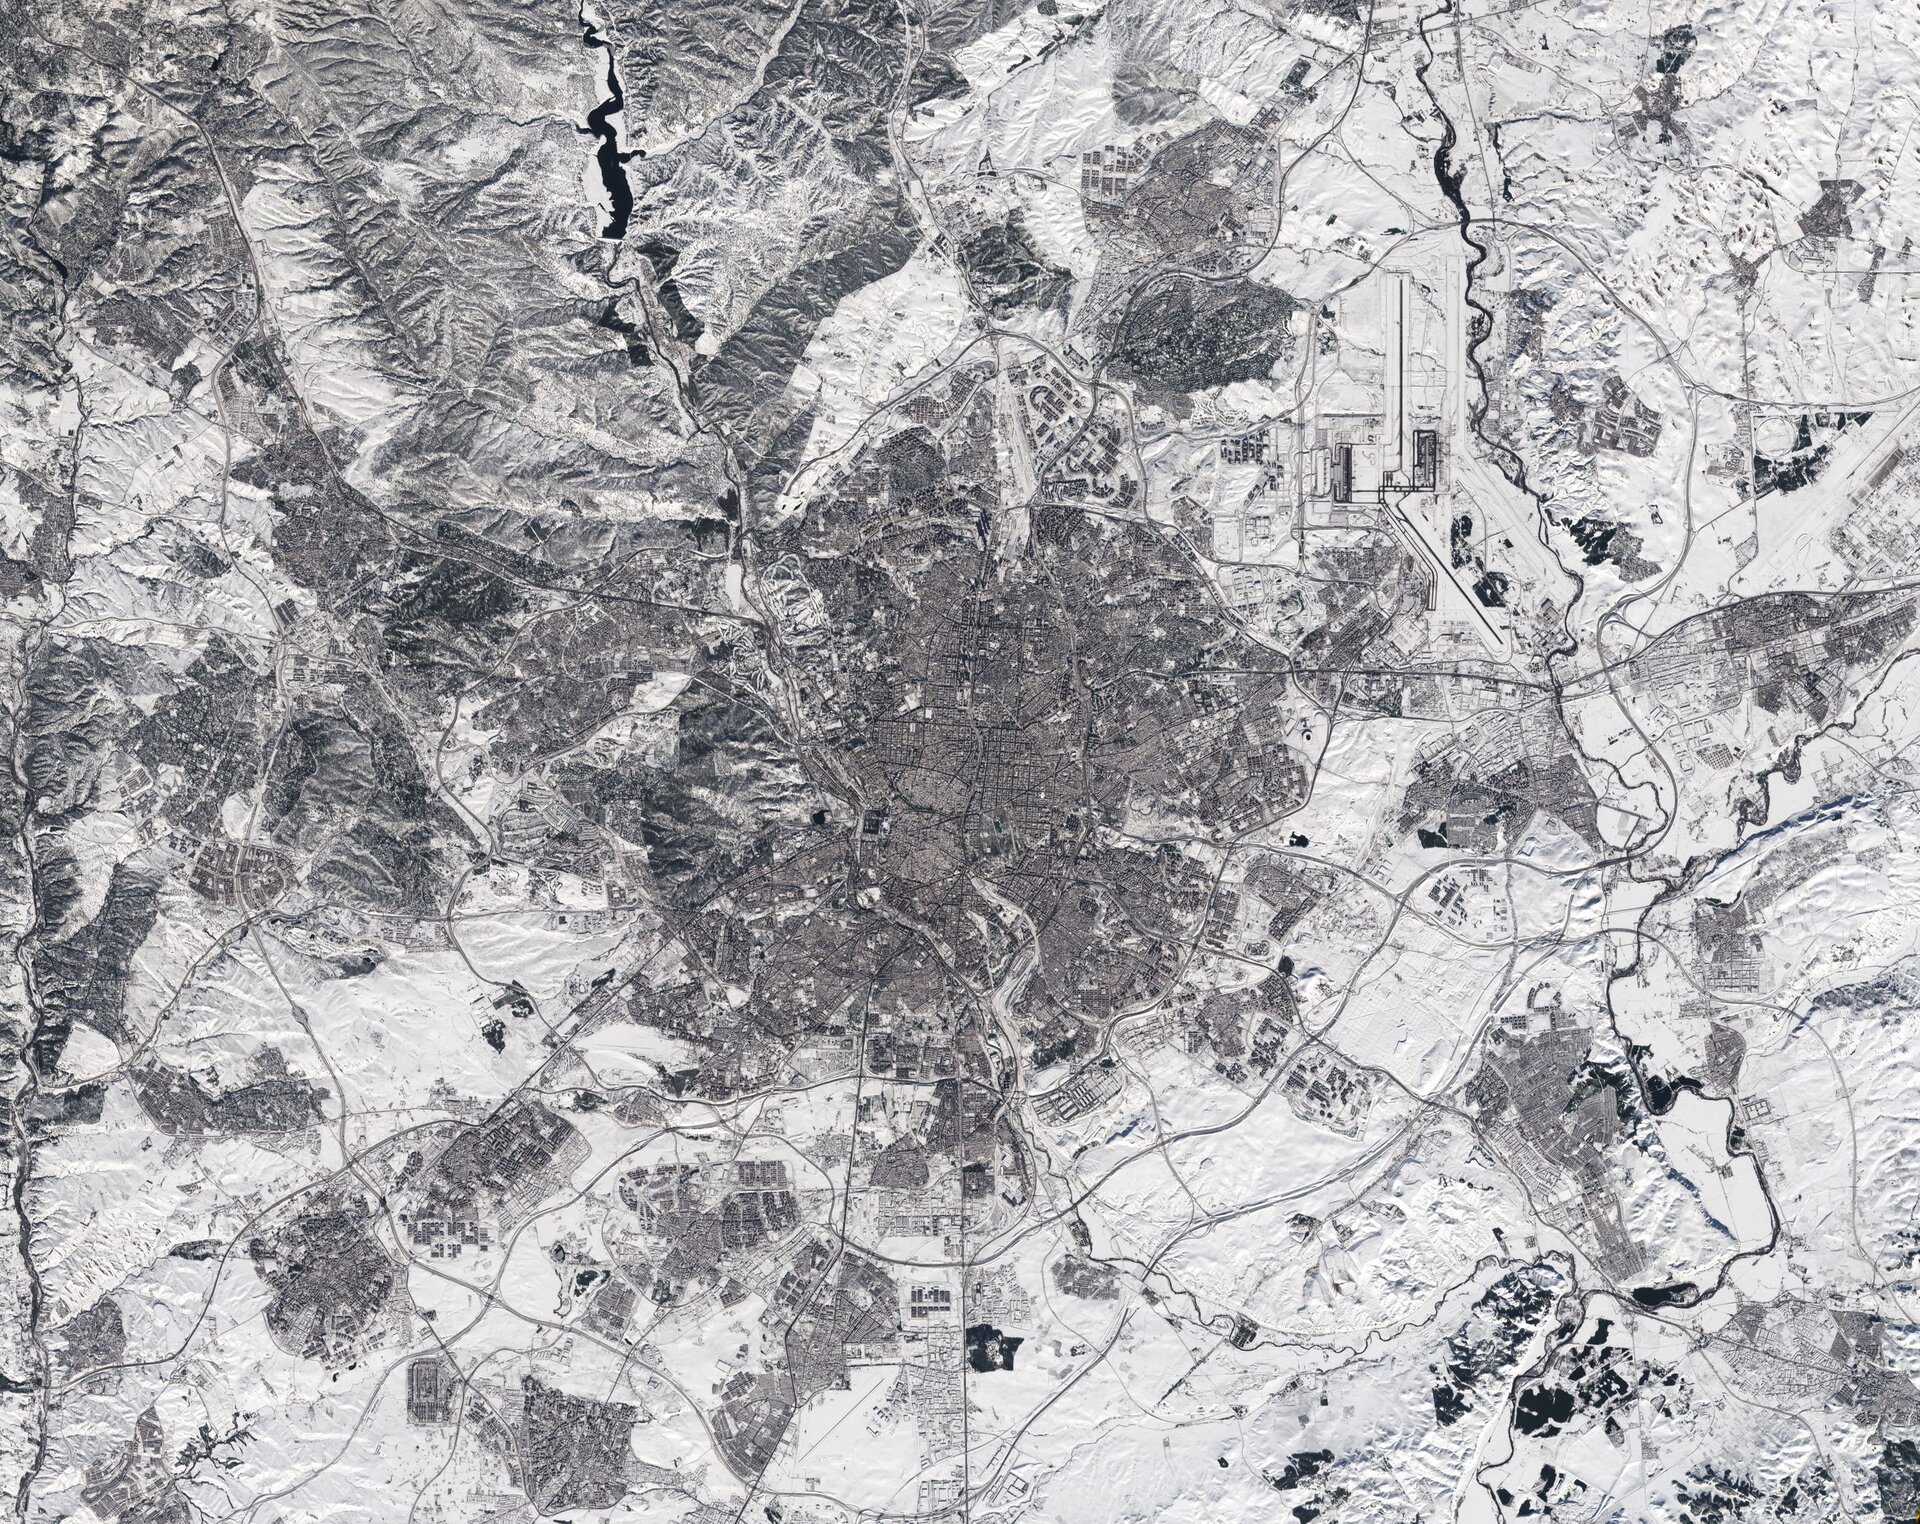 This Copernicus Sentinel-2 image of Madrid in Spain appears to have been taken in black and white. In fact, it is a true-colour image – but the heaviest snowfall in 50 years has blanketed the region, turning the landscape white.